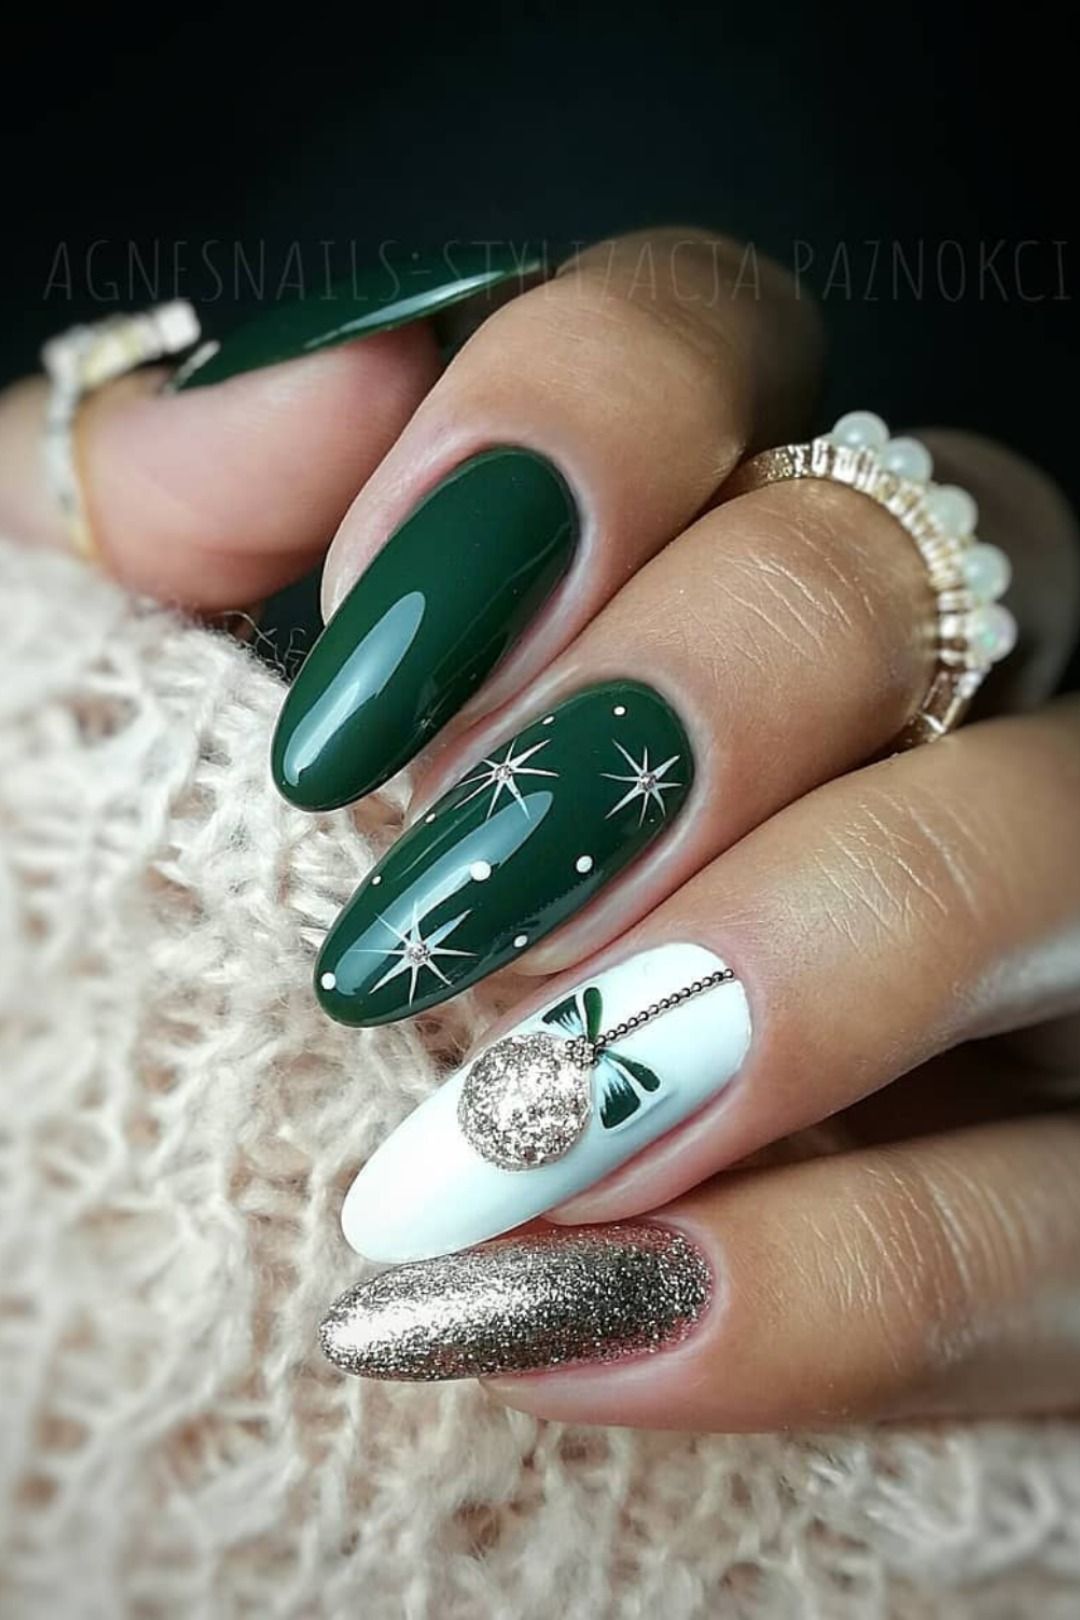 Beautiful Green Christmas Nails With White Snowflakes And Glitter Design Christmasnails Christmasnail Cute Christmas Nails Xmas Nails Christmas Nail Designs